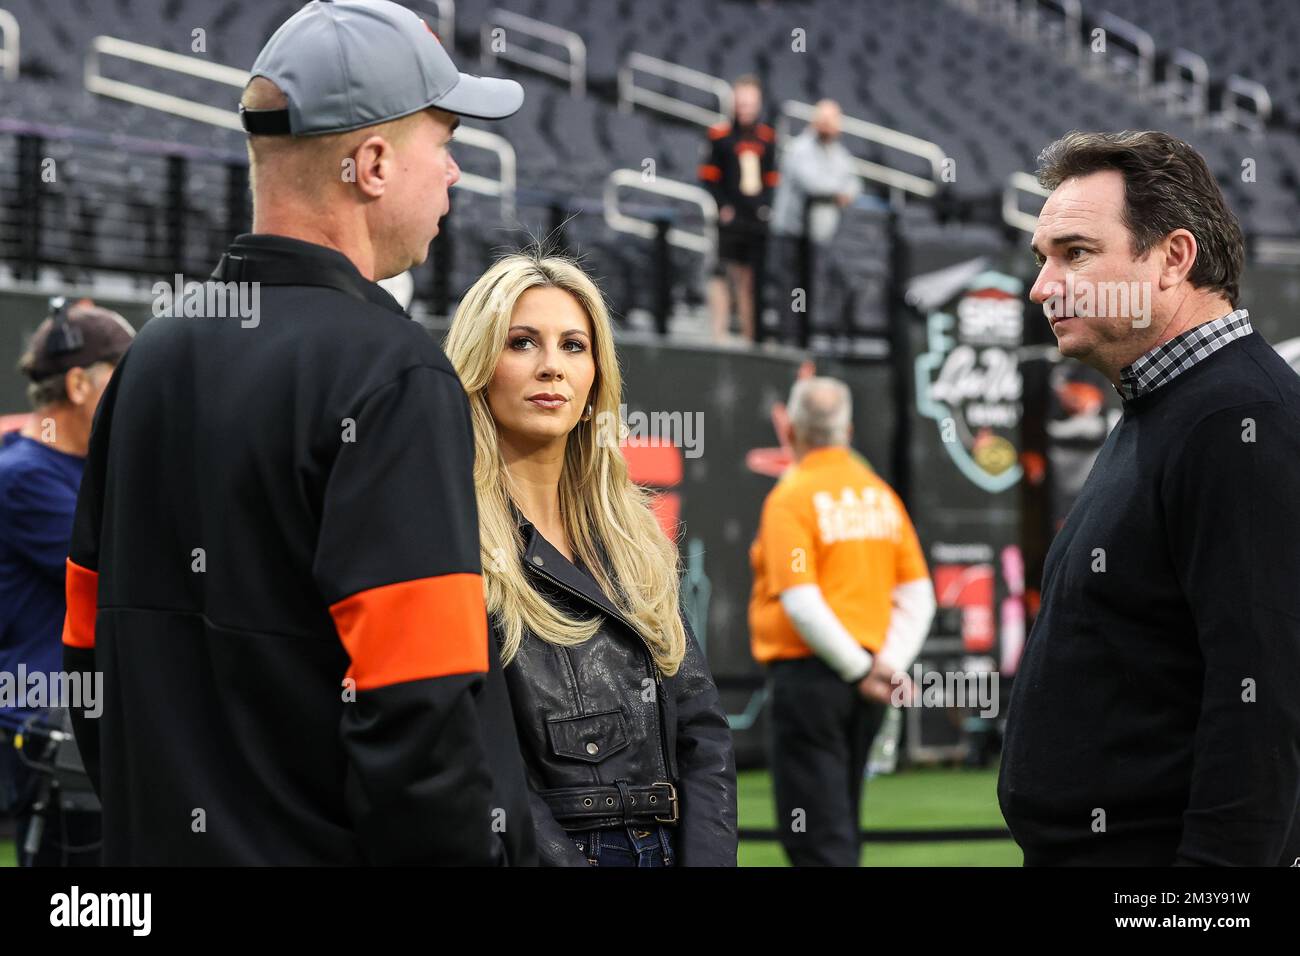 Las Vegas, NV, USA. 17th Dec, 2022. Oregon State Beavers head coach Jonathan Smith and ESPN sideline reporter Laura Rutledge on the sidelines prior to the start of the SRS Distribution Las Vegas Bowl featuring the Florida Gators and the Oregon State Beavers at Allegiant Stadium in Las Vegas, NV. Christopher Trim/CSM/Alamy Live News Stock Photo